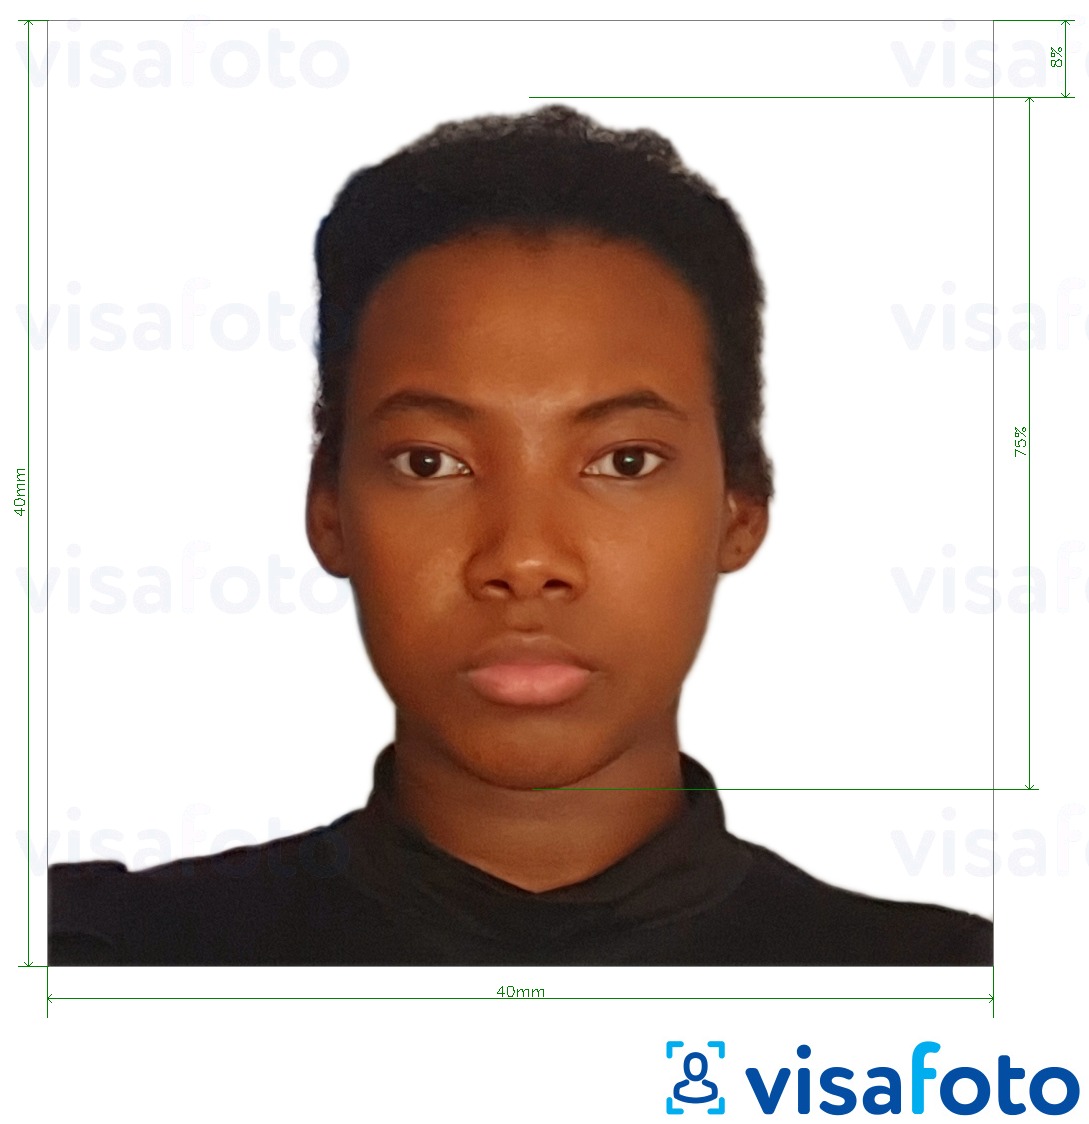 Example of photo for Cameroon visa 4x4 cm (40x40 mm) with exact size specification